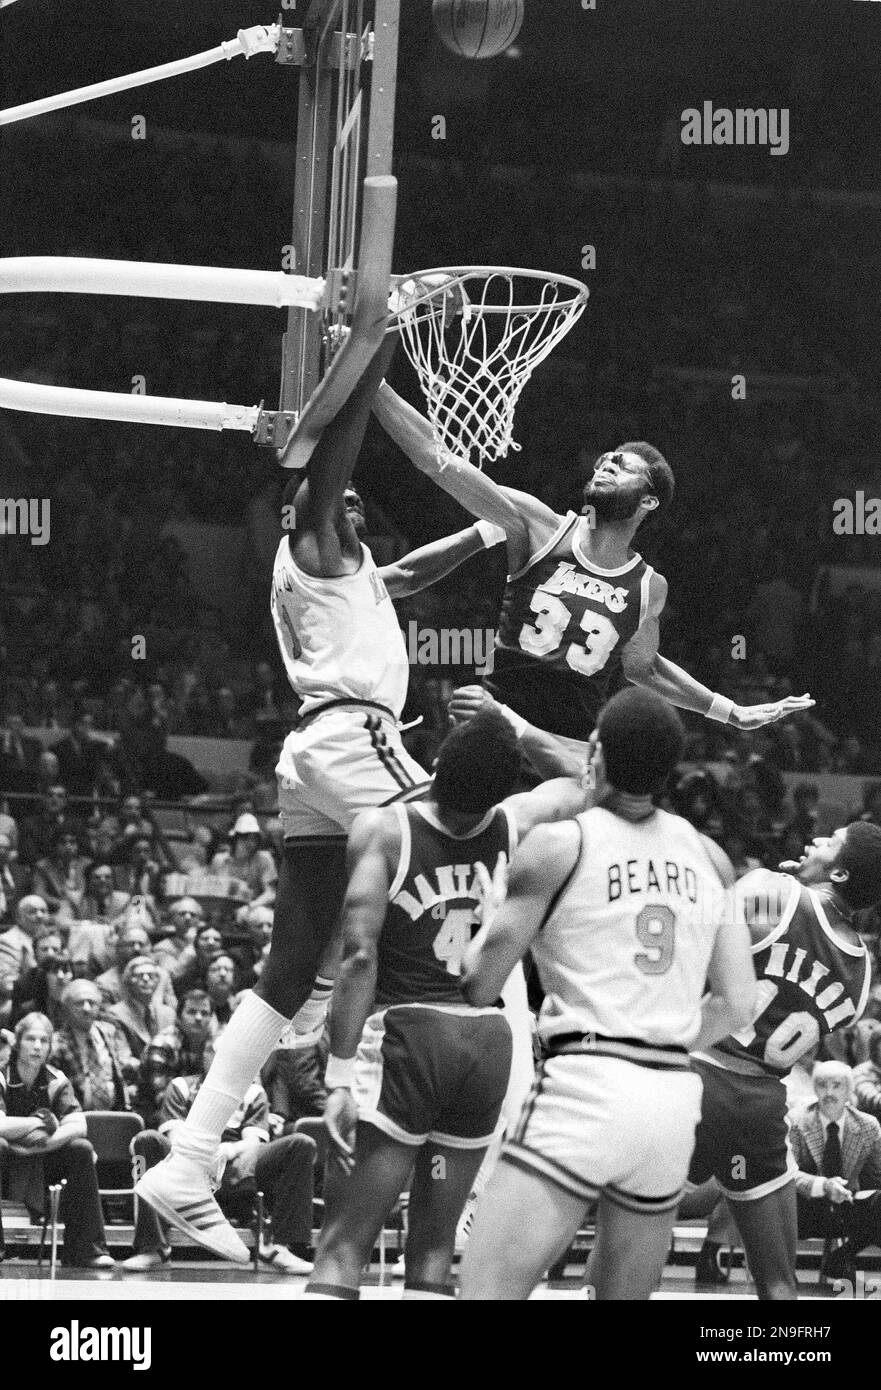 New York Knick's Bob McAdoo reaches out and blocks a shot by Philadelphia  76ers' Julius Erving